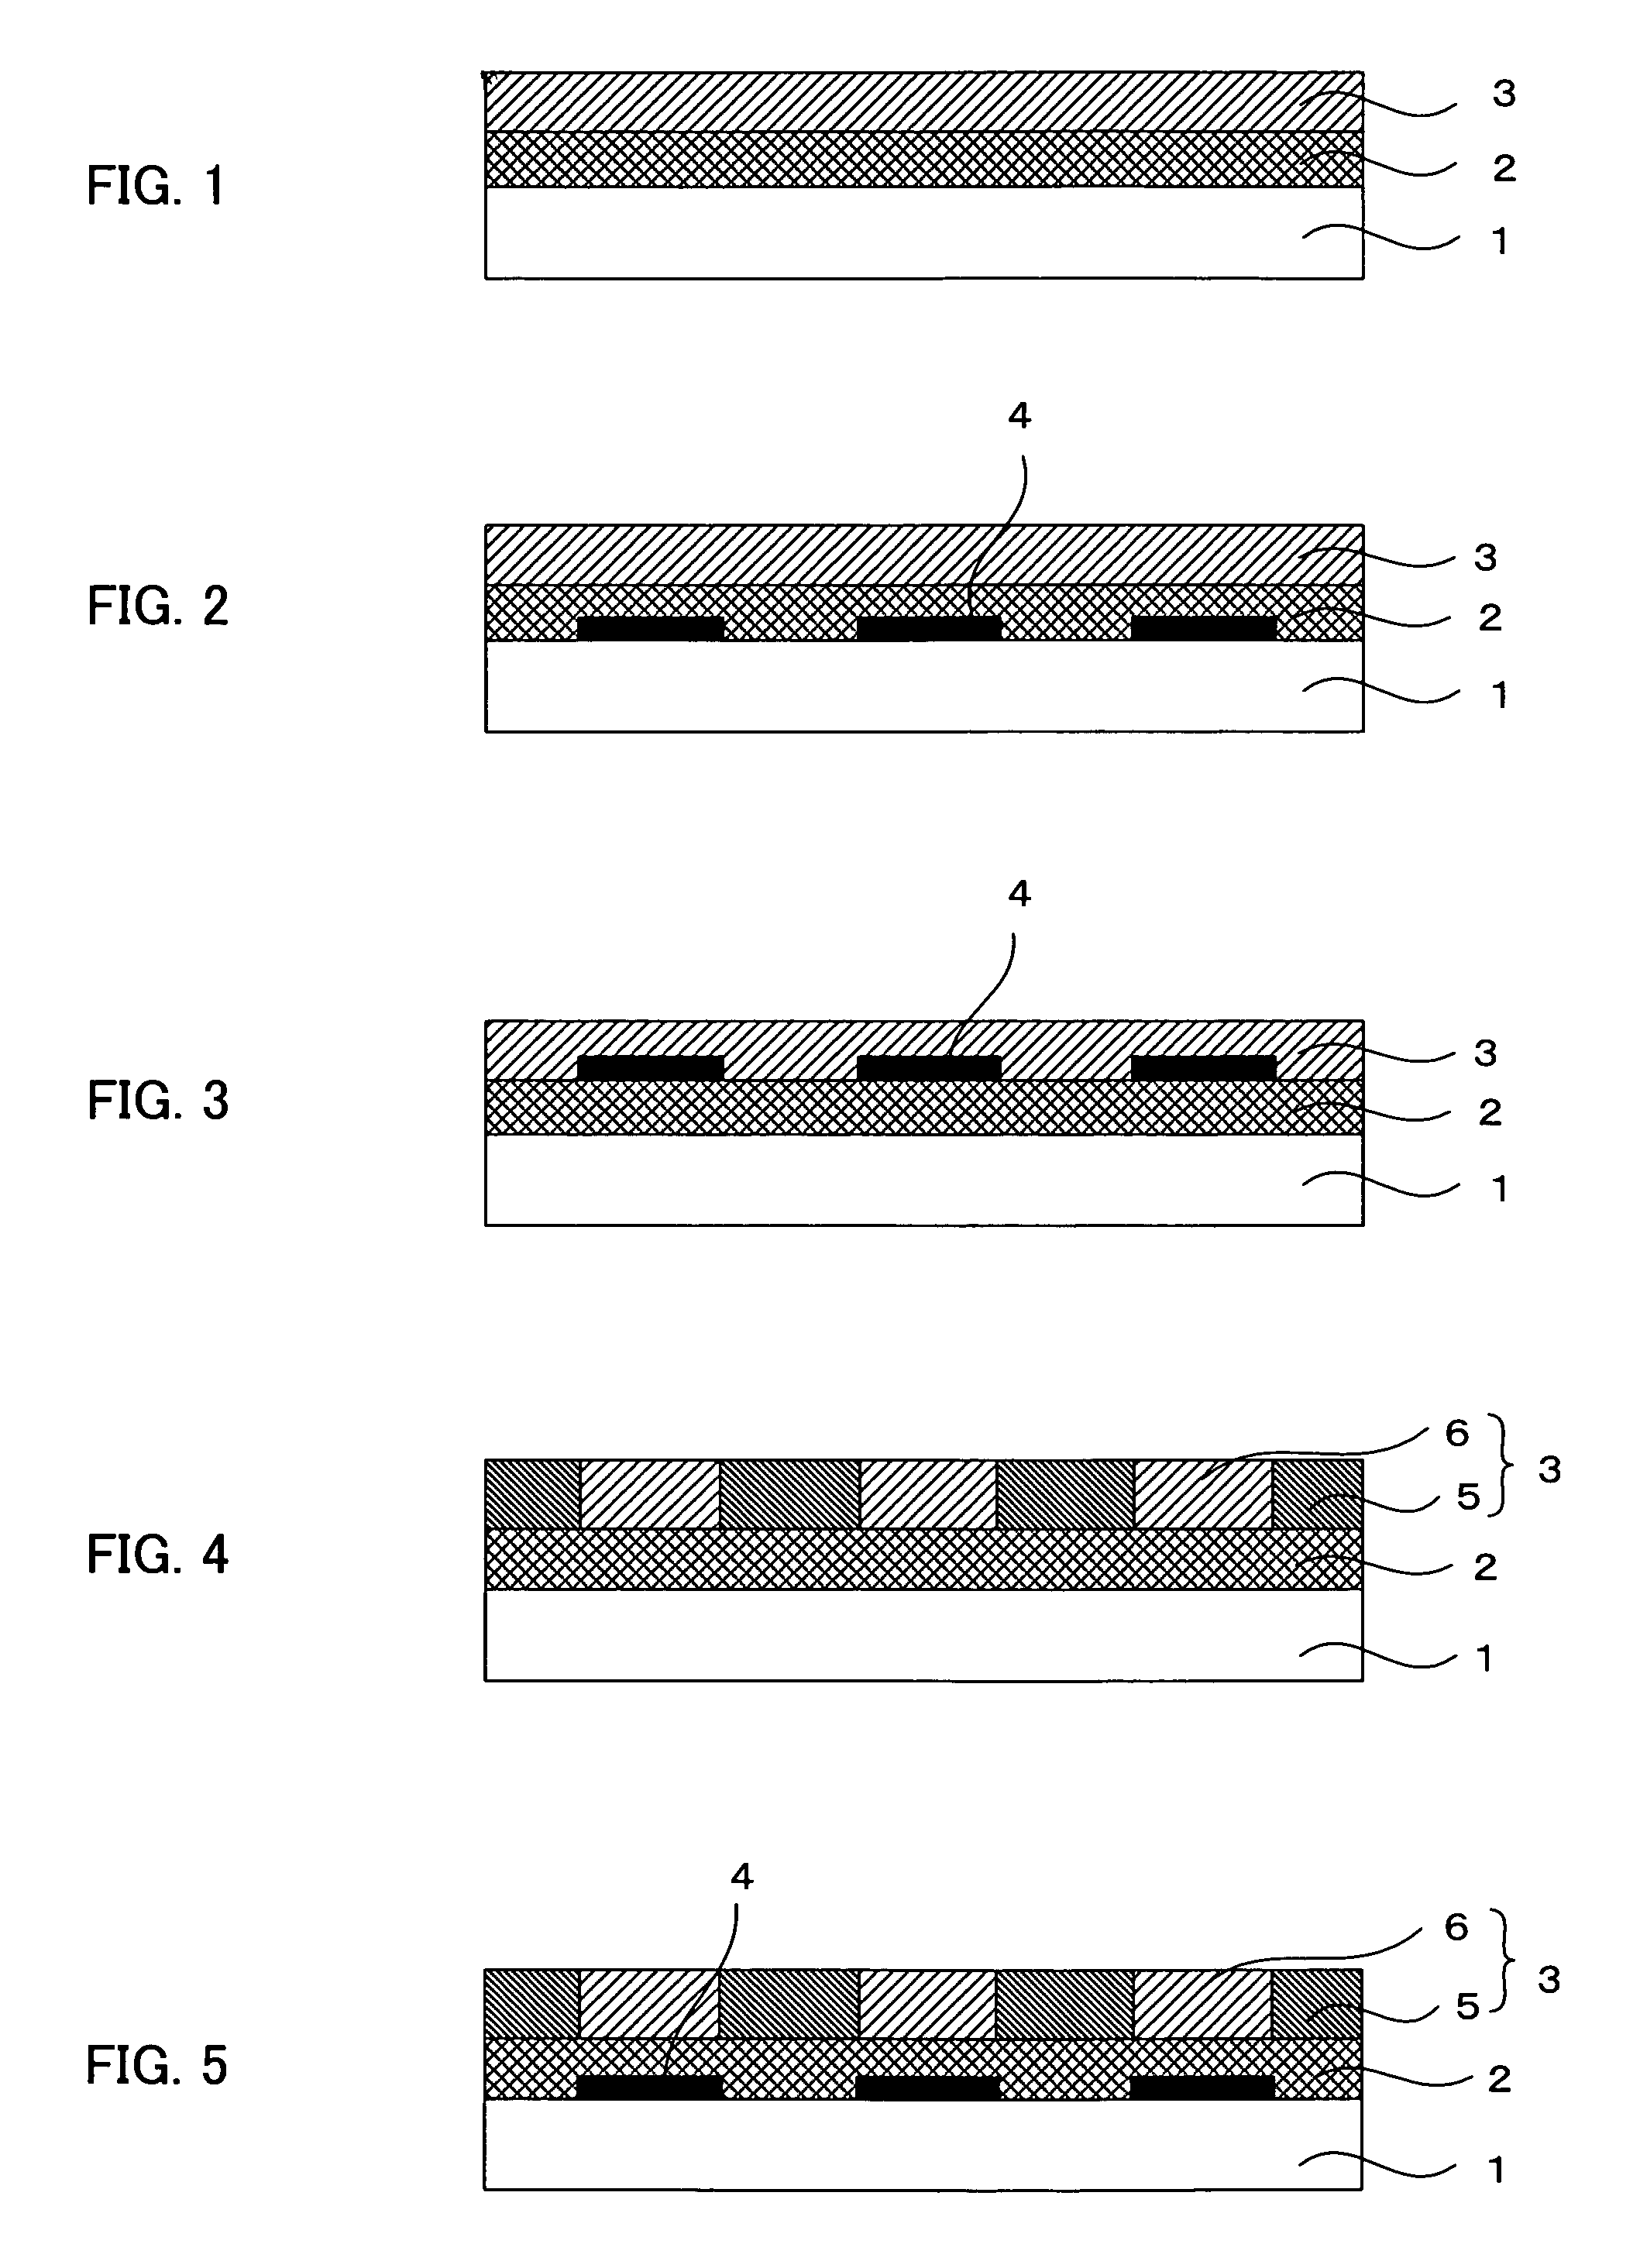 Patterning substrate and cell culture substrate